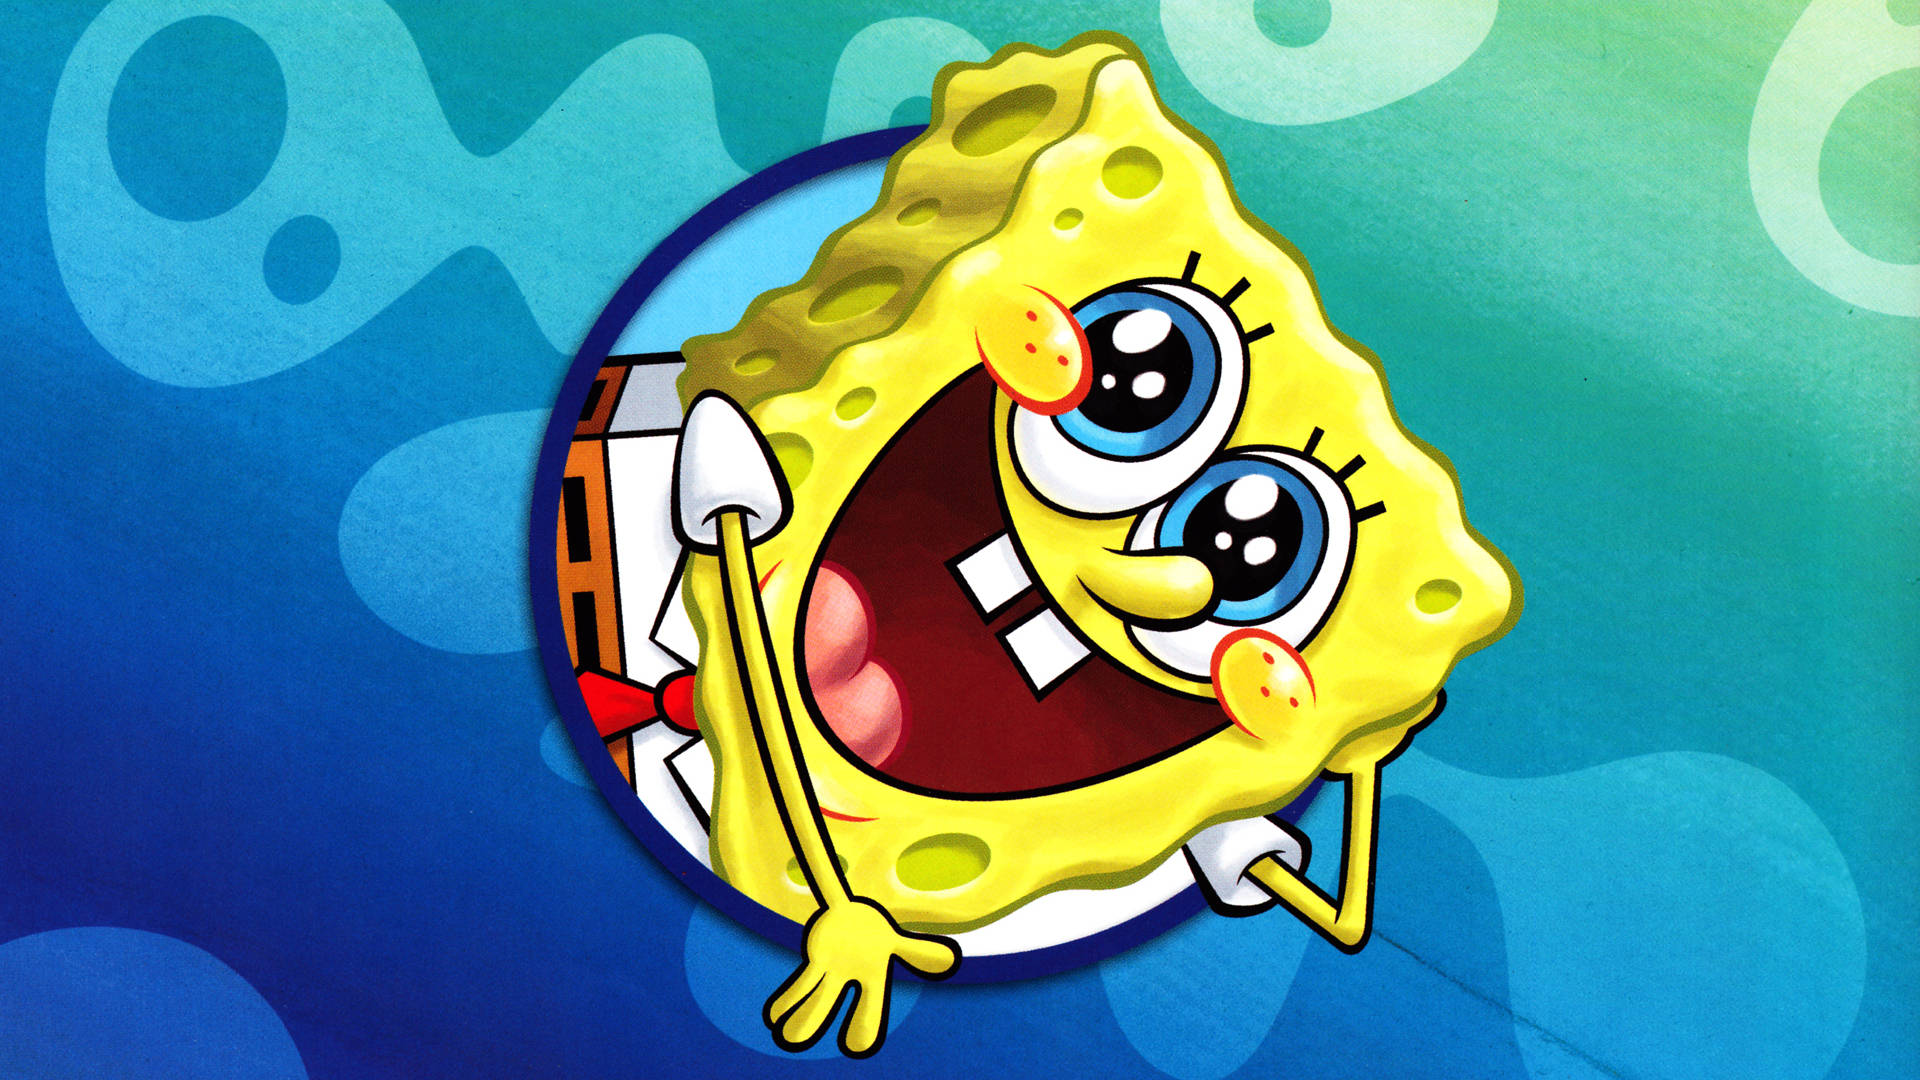 Funny Spongebob With Sparkly Eyes Wallpaper